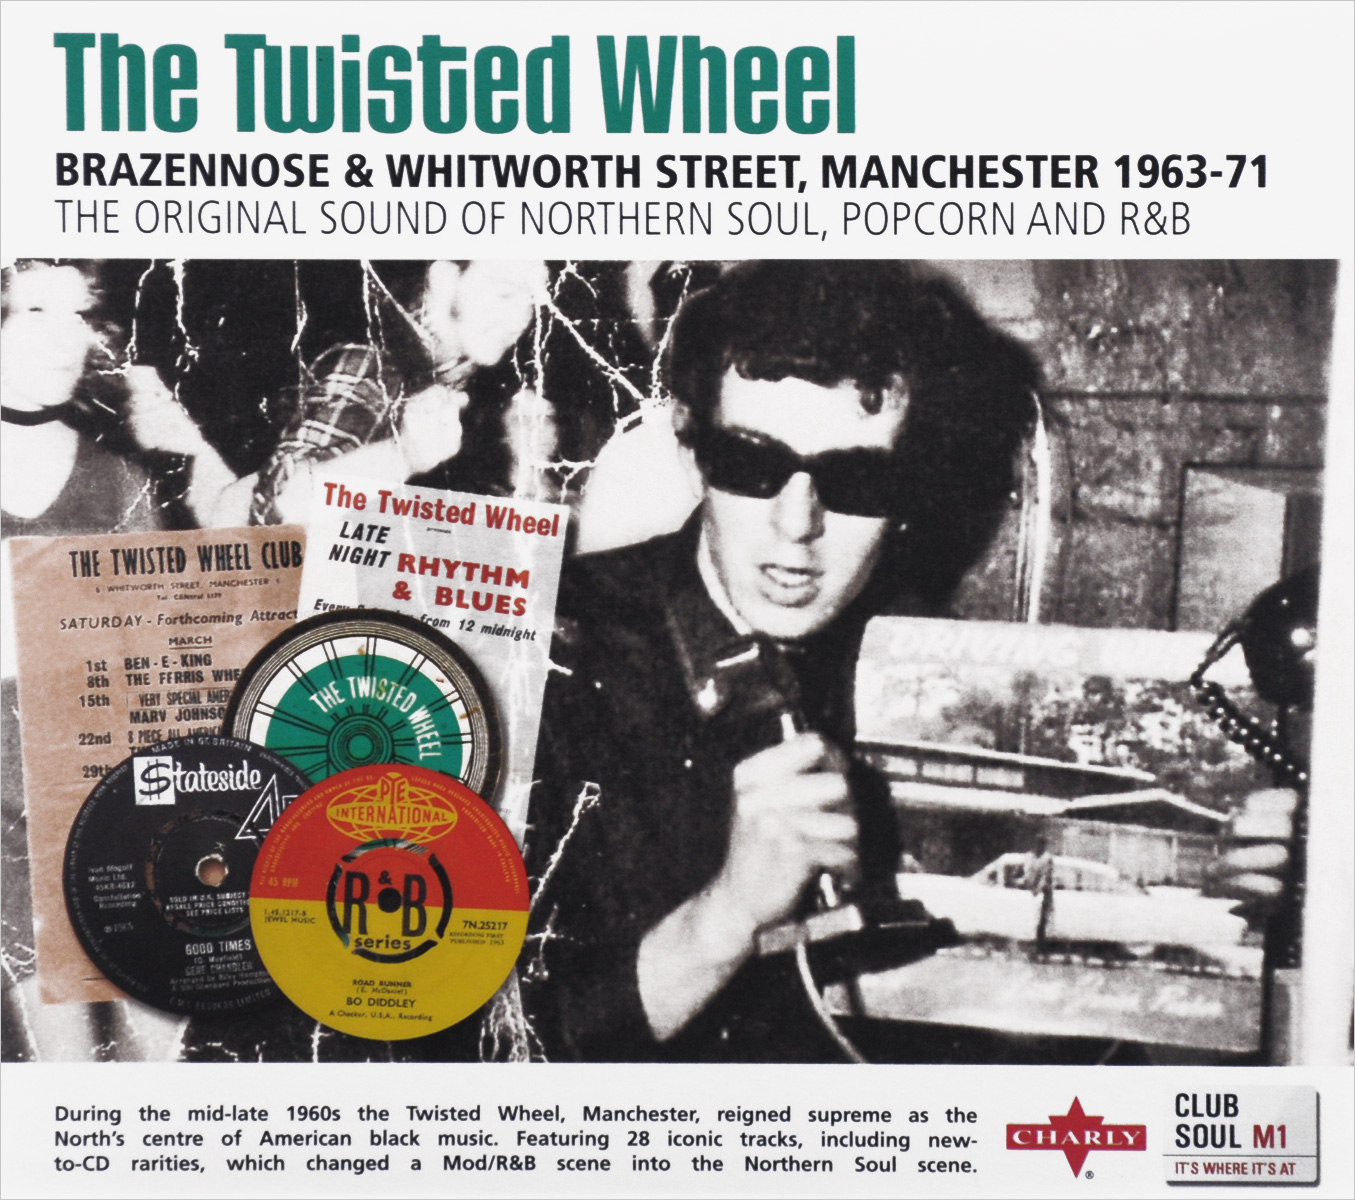 The Twisted Wheel. Brazebbose & Whitworth Street, Manchester 1963-71. The Original Sound Of Nothern Soul, Popcorn And R&B